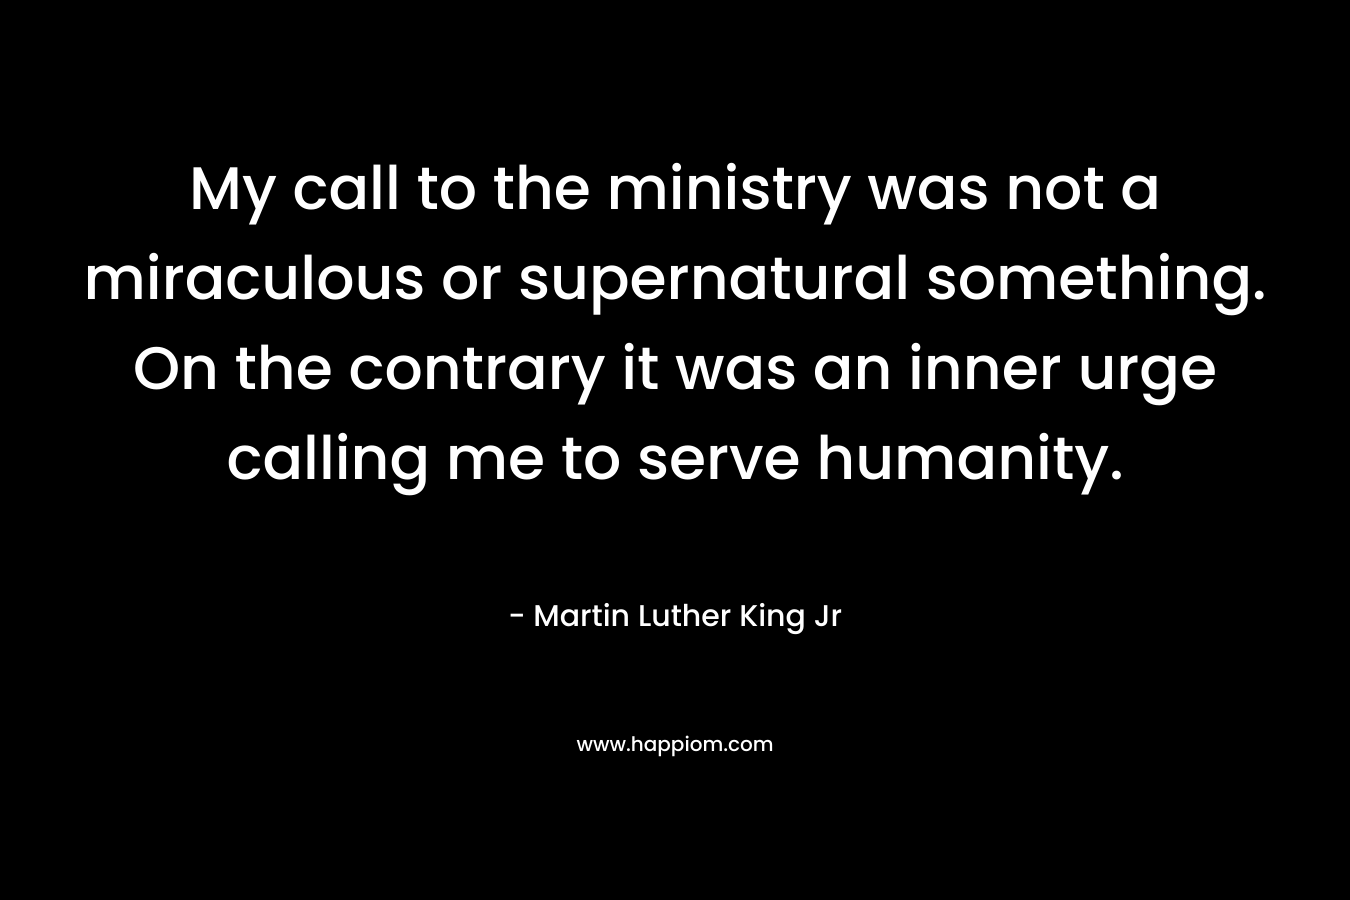 My call to the ministry was not a miraculous or supernatural something. On the contrary it was an inner urge calling me to serve humanity.